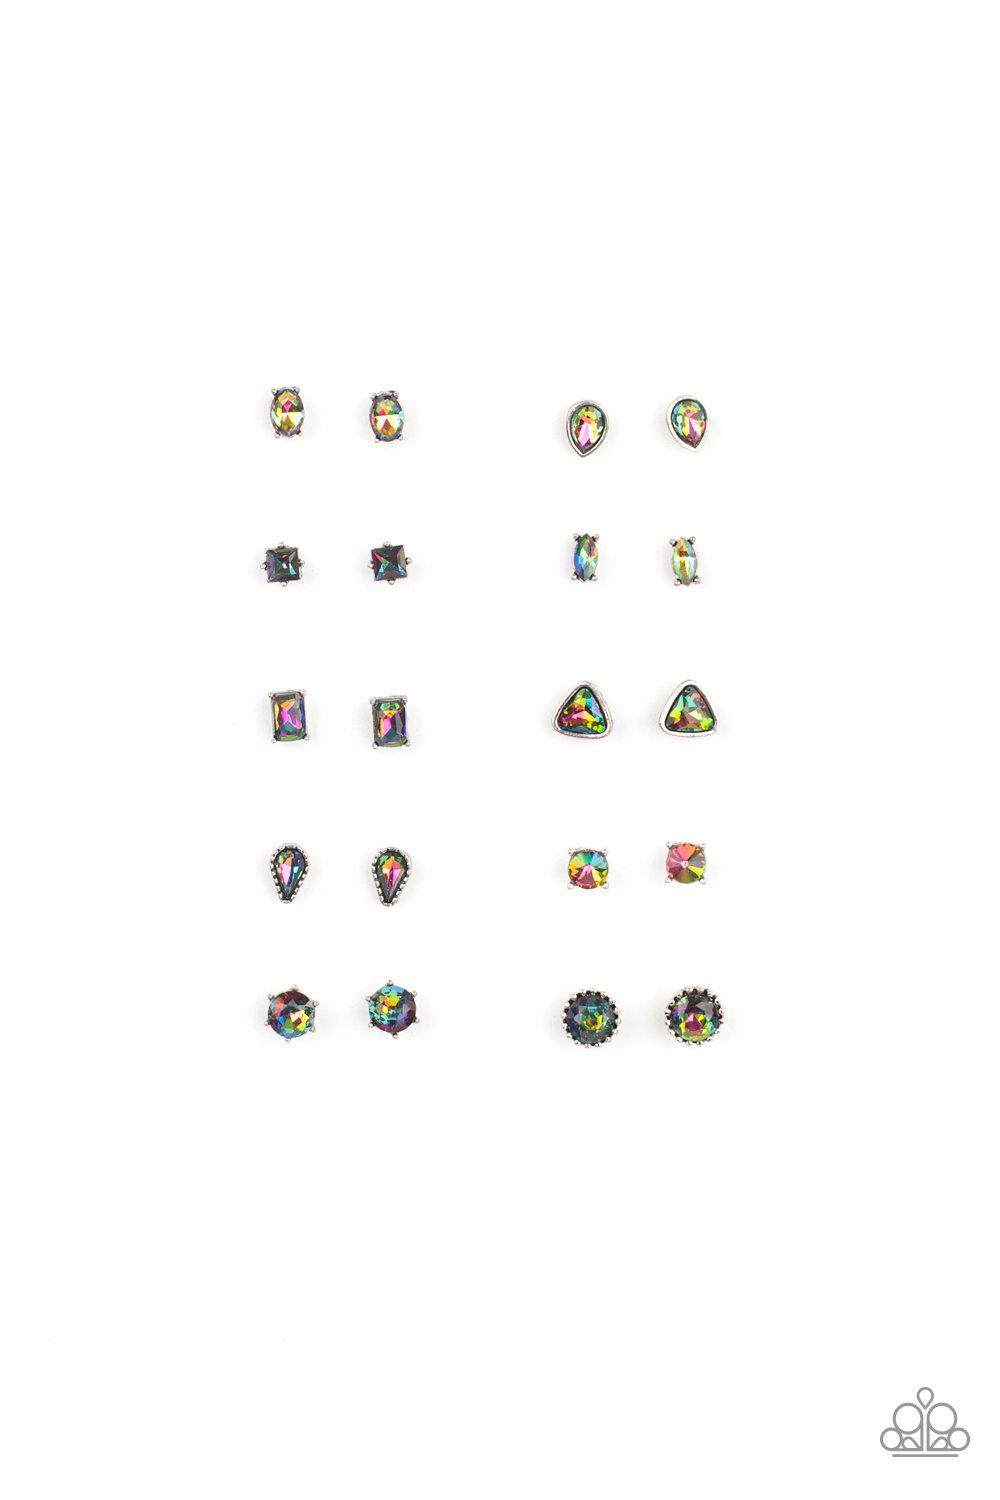 Starlet Shimmer Children&#39;s &quot;Oil Spill&quot; Rhinestone Post Earrings v3 - Paparazzi Accessories (set of 10 pairs) - Full set -CarasShop.com - $5 Jewelry by Cara Jewels